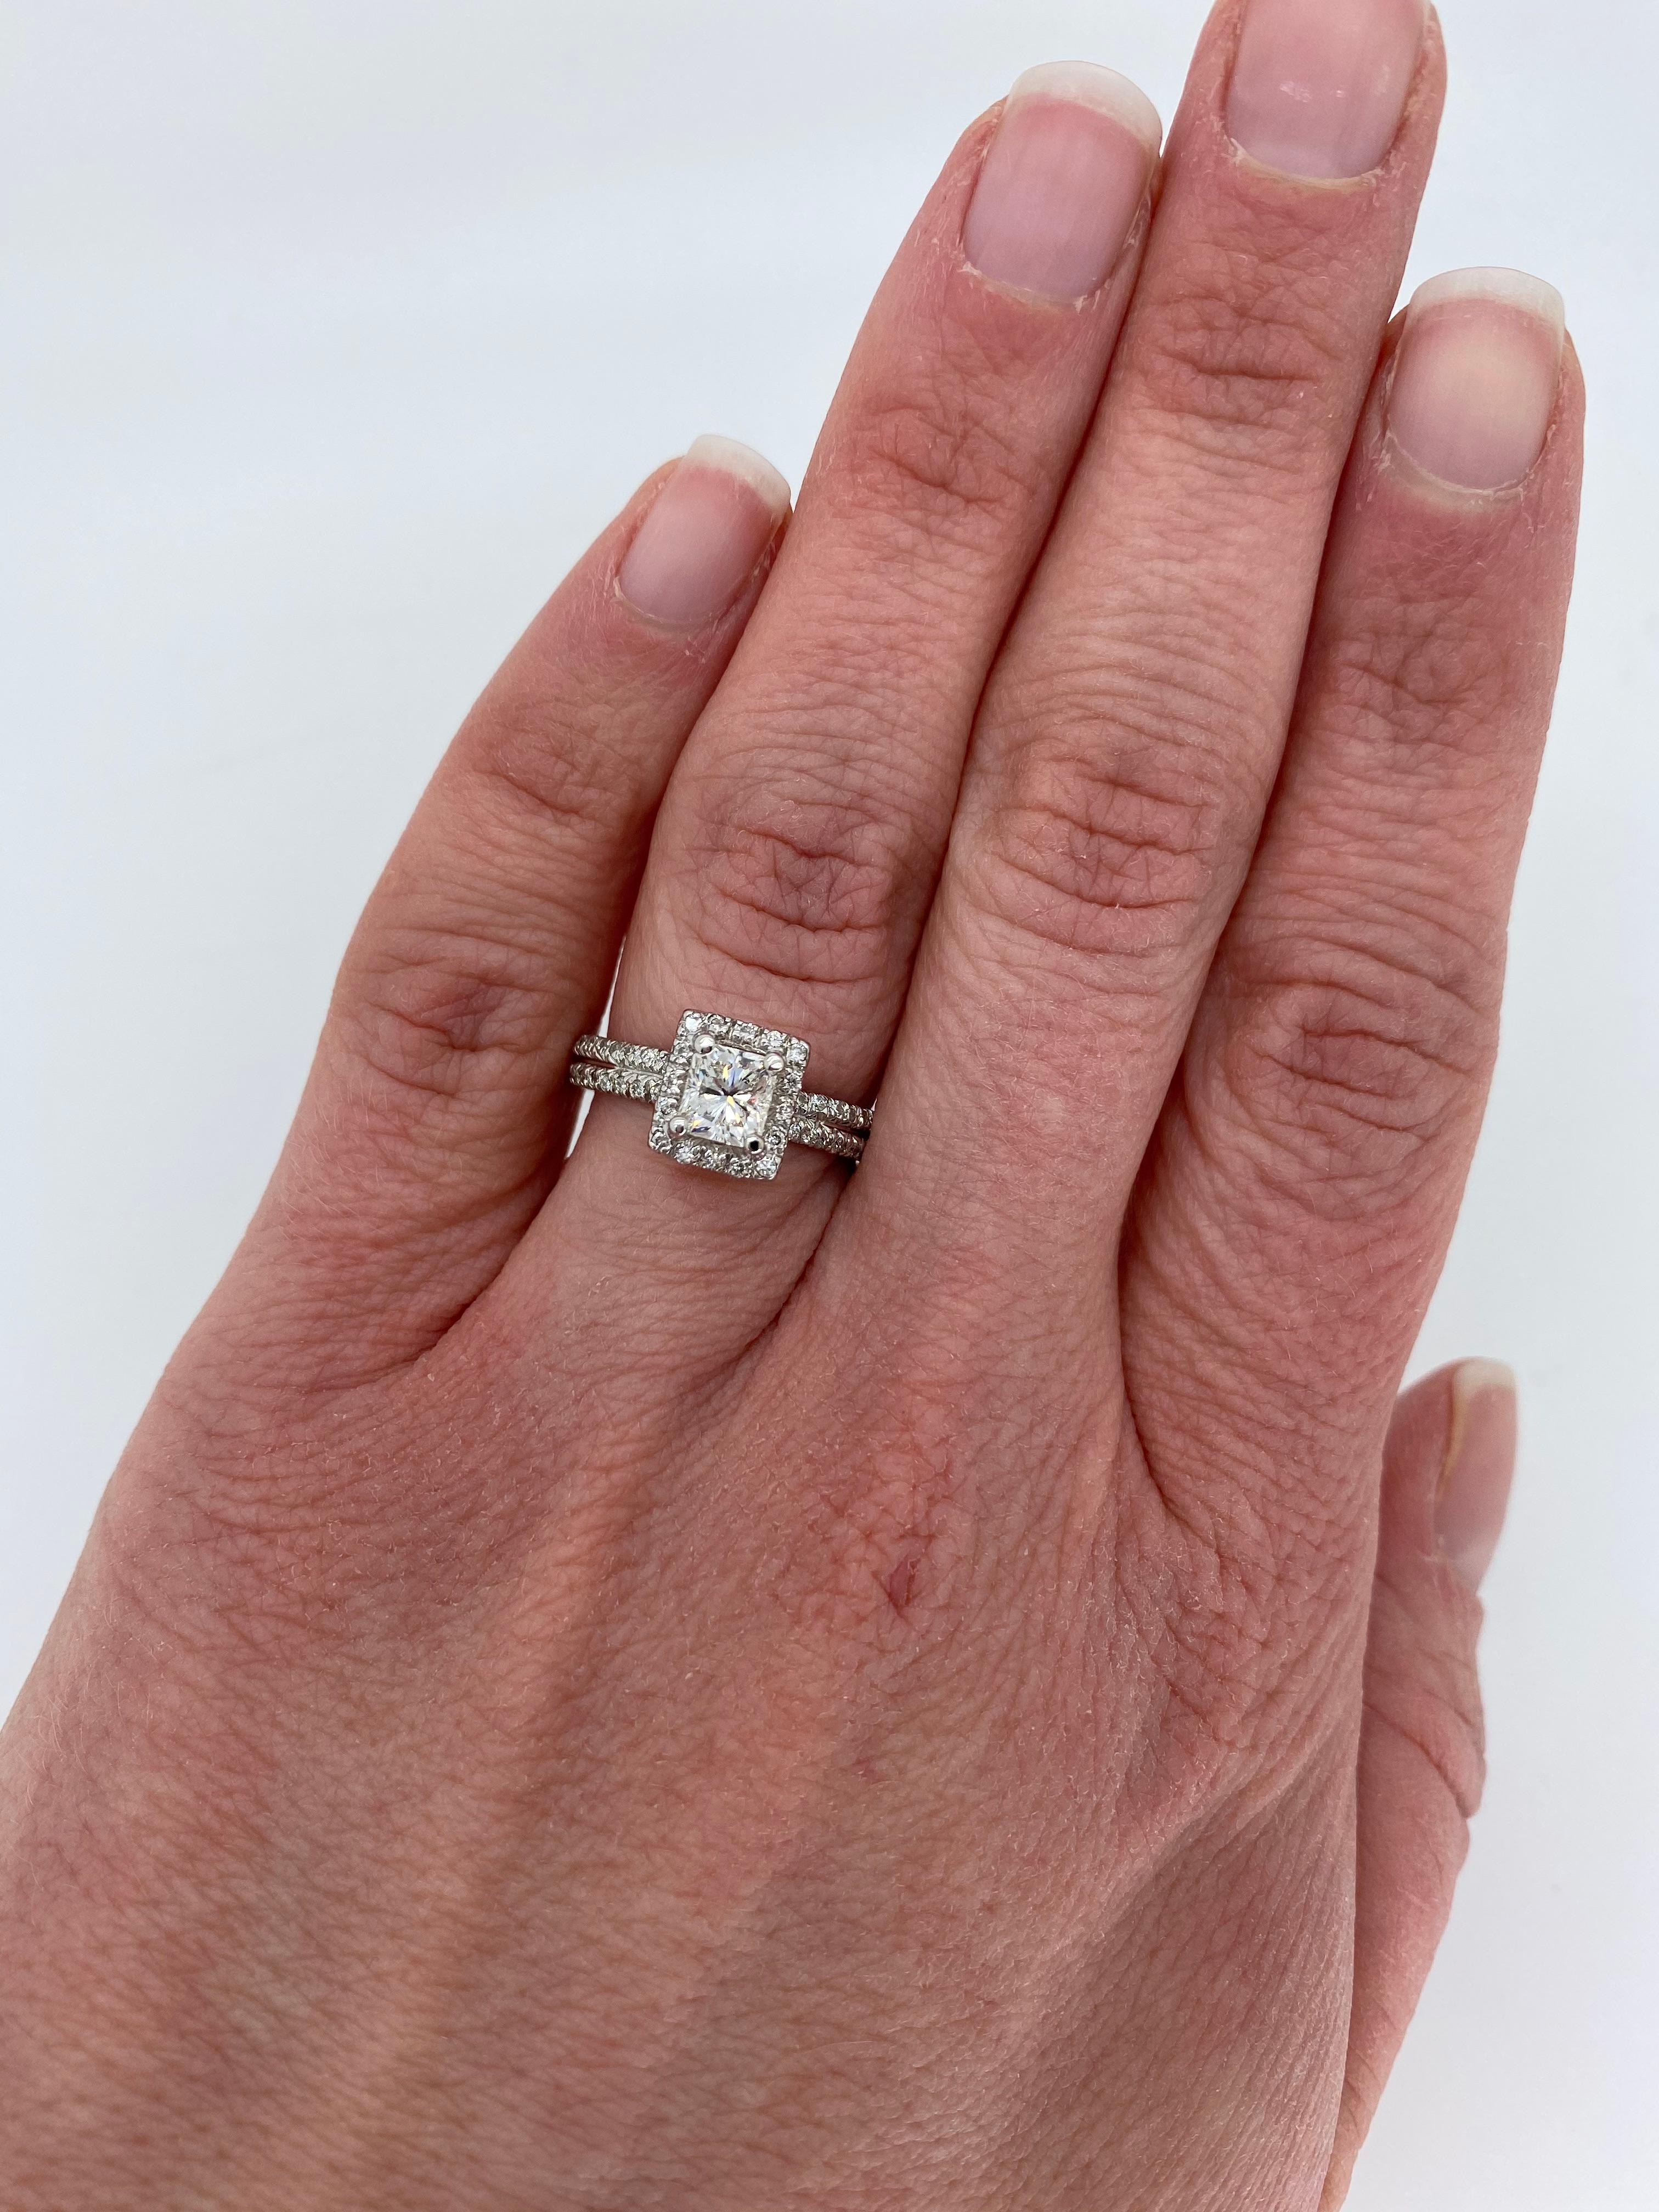 Approximately 1.15ctw halo style diamond engagement ring crafted in 18k white gold. 

Center Diamond Carat Weight: Approximately .69CT
Center Diamond Cut: Modified Rectangular Cut
Center Diamond Color: F
Center Diamond Clarity: SI1
Total Diamond